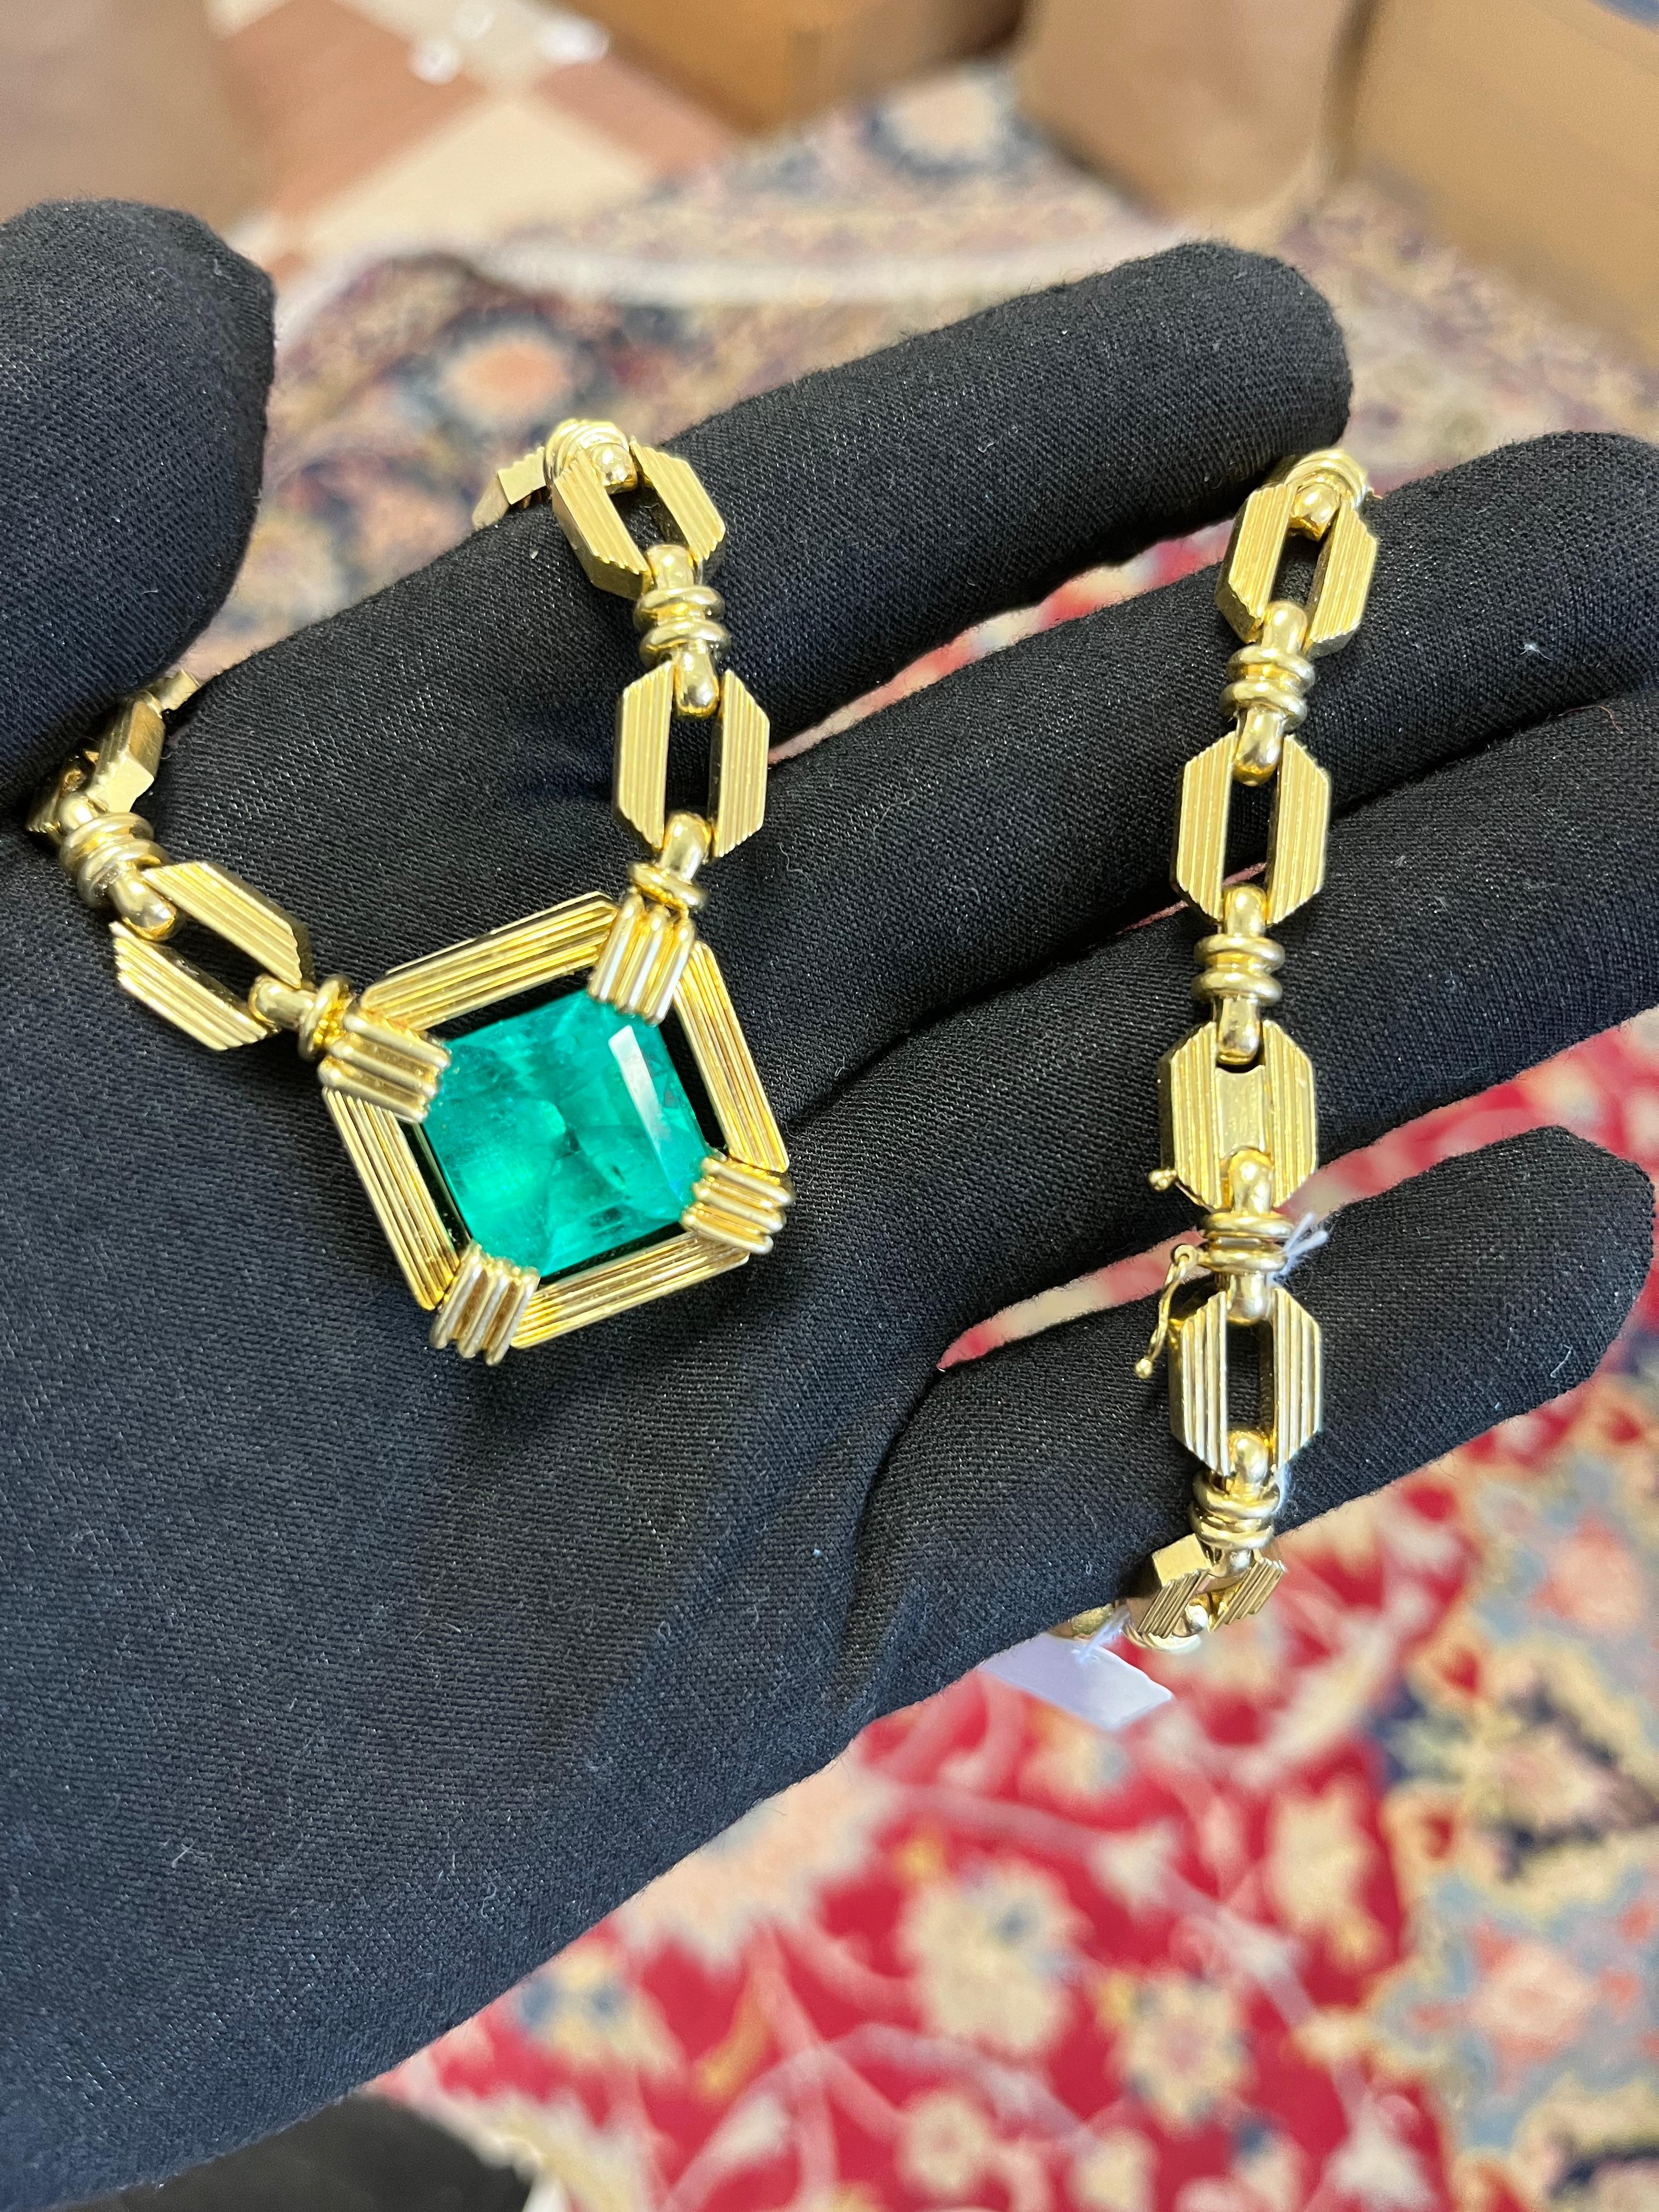 Henry Dunay Signed 19.48 Carat Colombian Emerald Necklace in 18k Yellow Gold For Sale 1